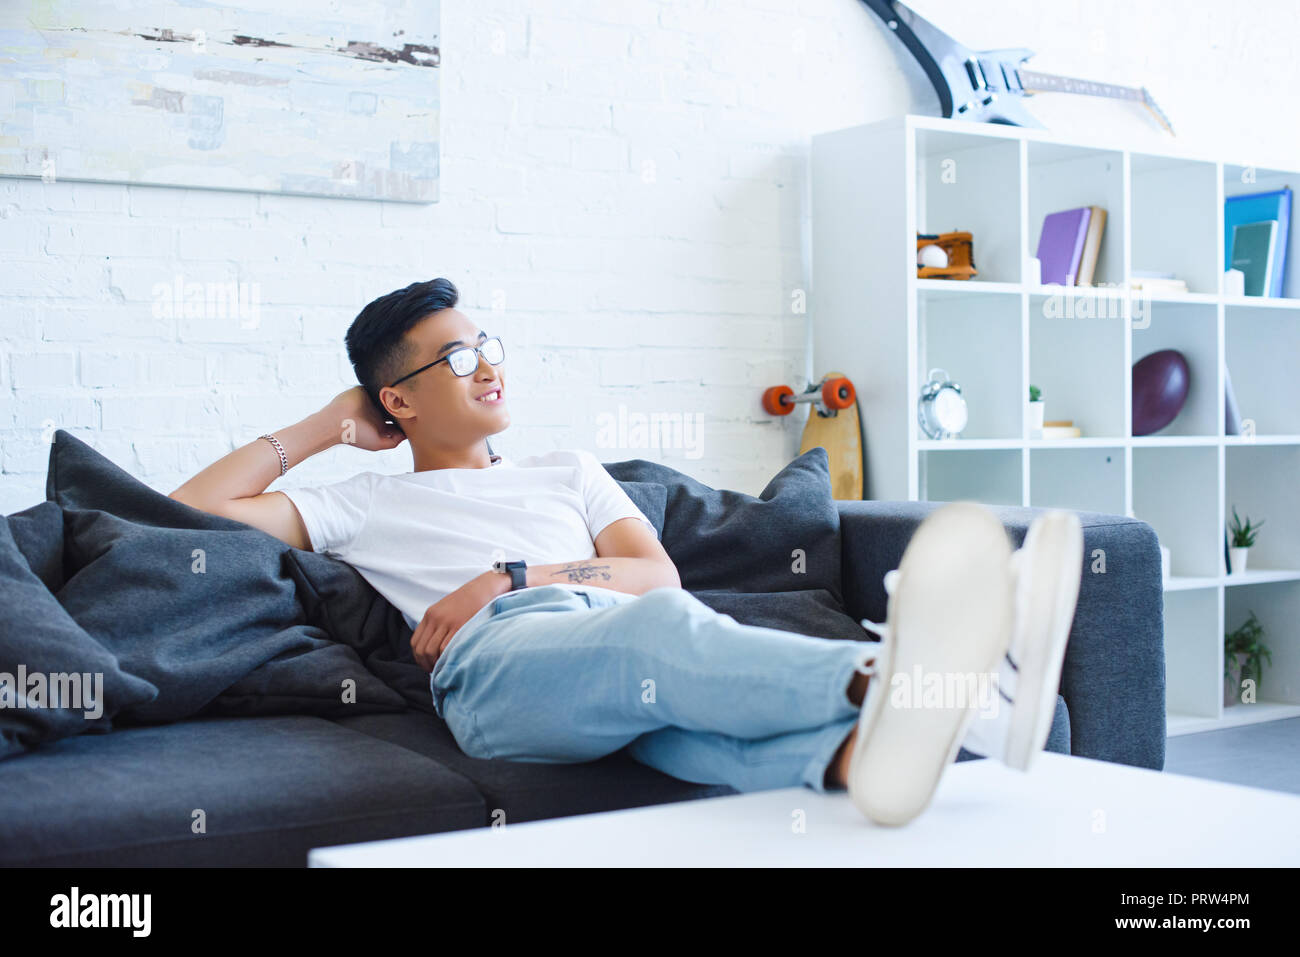 smiling handsome asian man sitting on sofa with legs on table at home, looking away Stock Photo